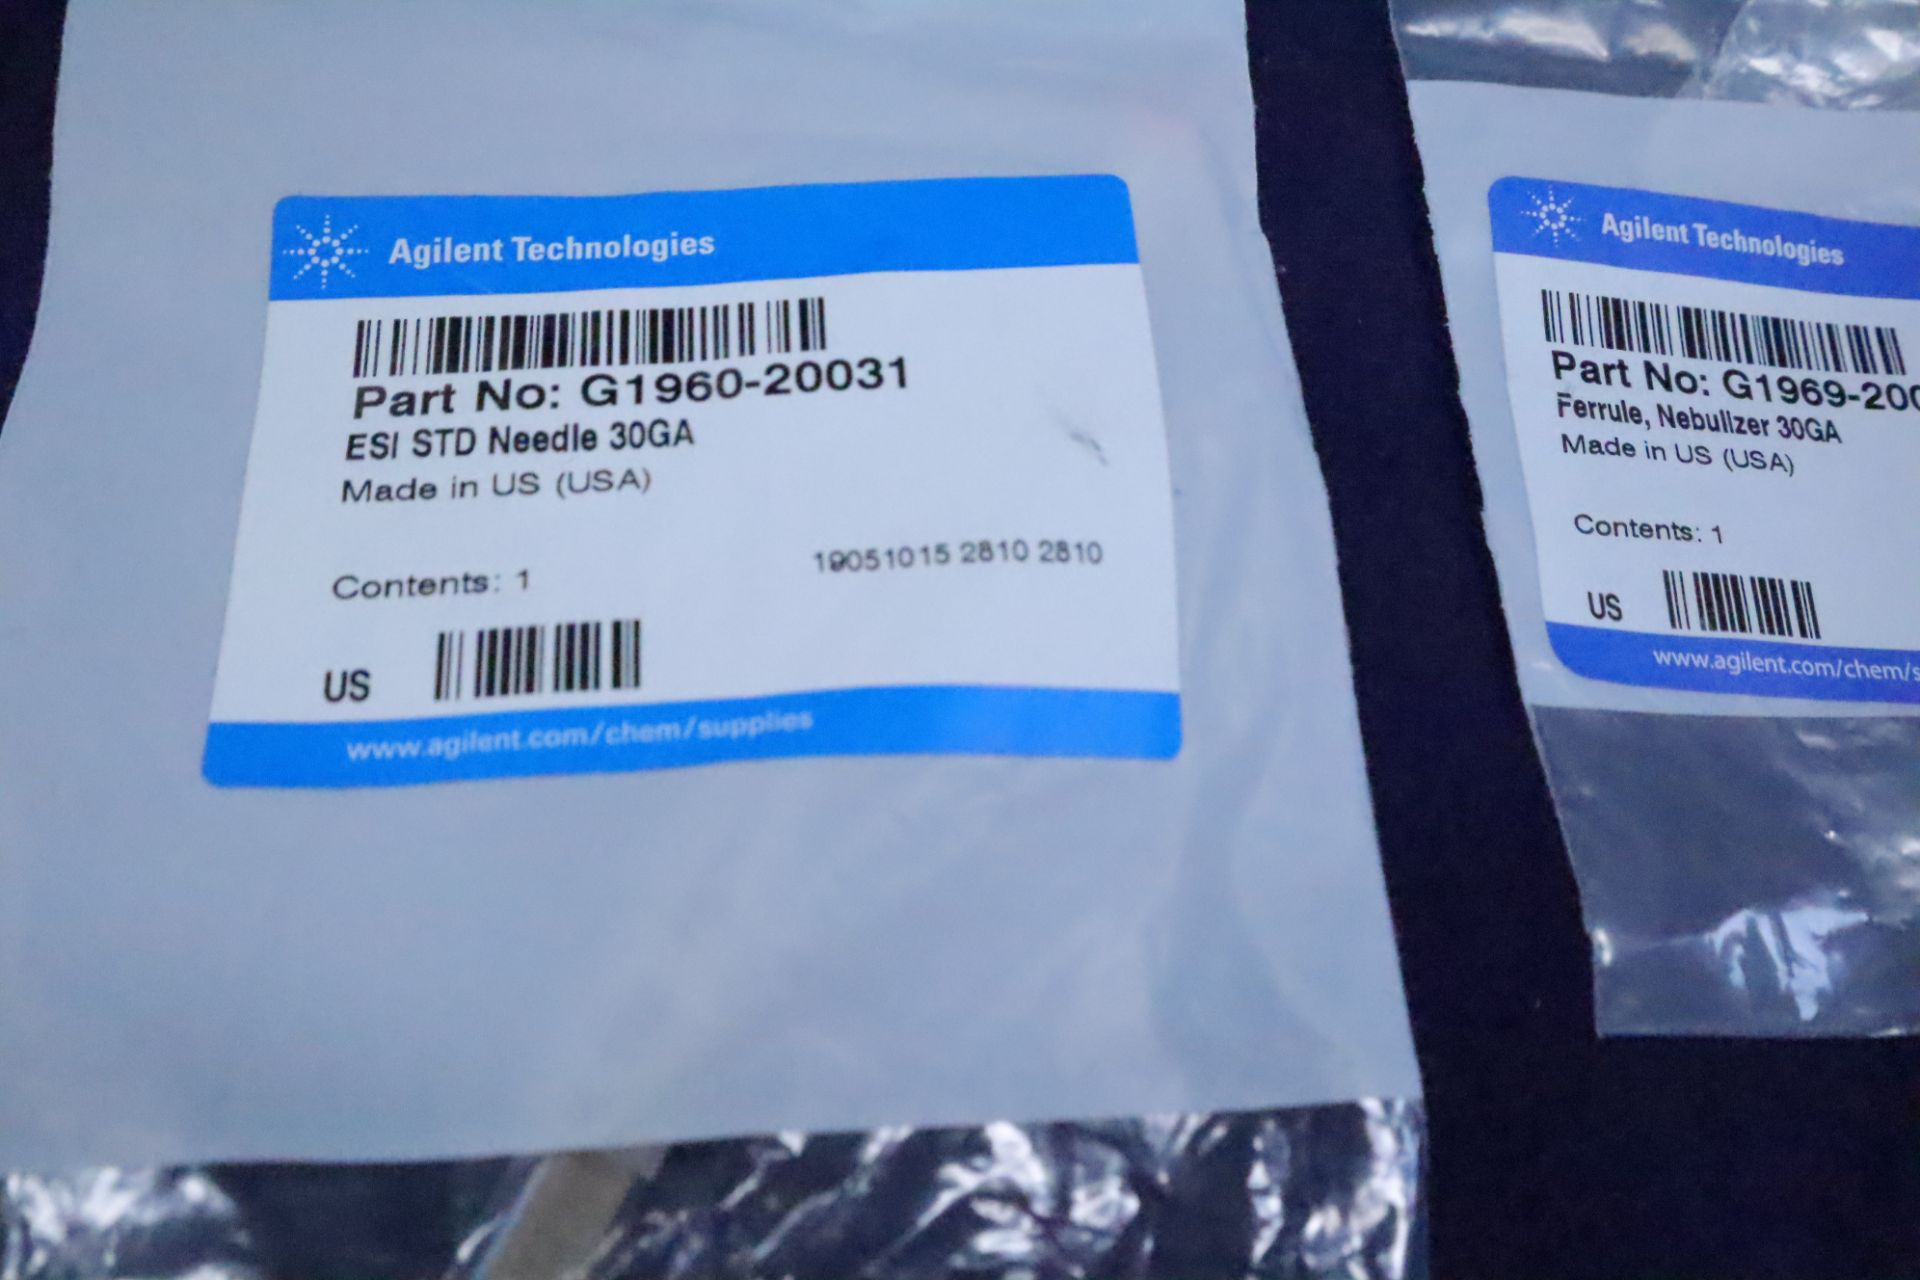 (NIB) Agilent Technologies OEM Replacement Parts for LC/MS Machines - Image 18 of 24